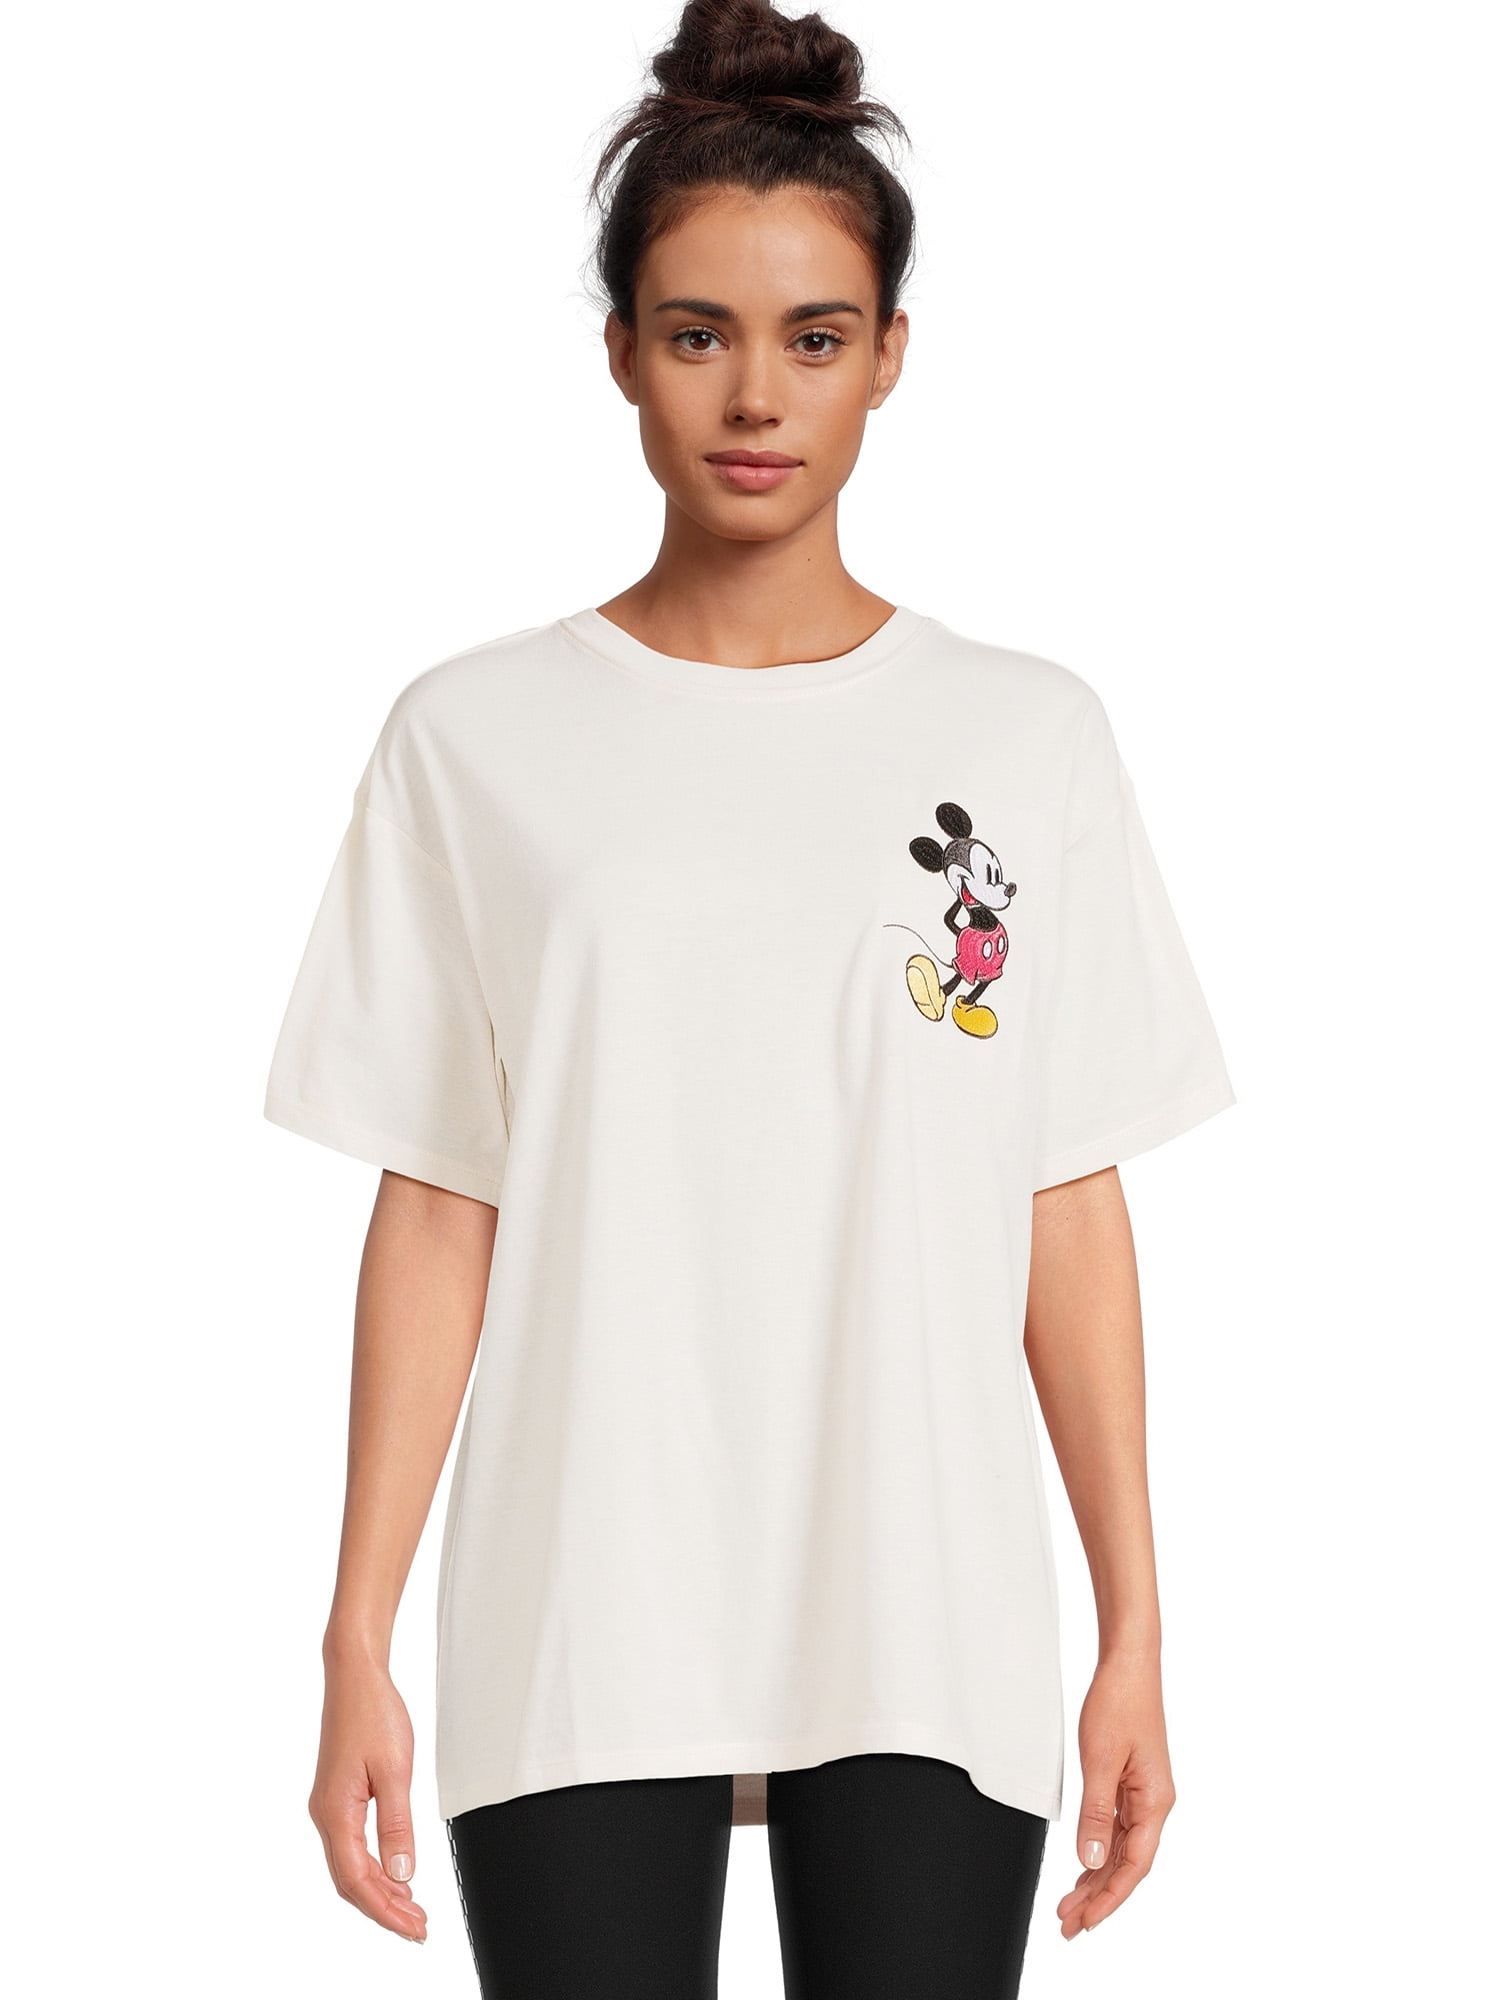 Disney Mickey Mouse Juniors Embroidered Oversized Graphic Tee, Sizes XS-3XL